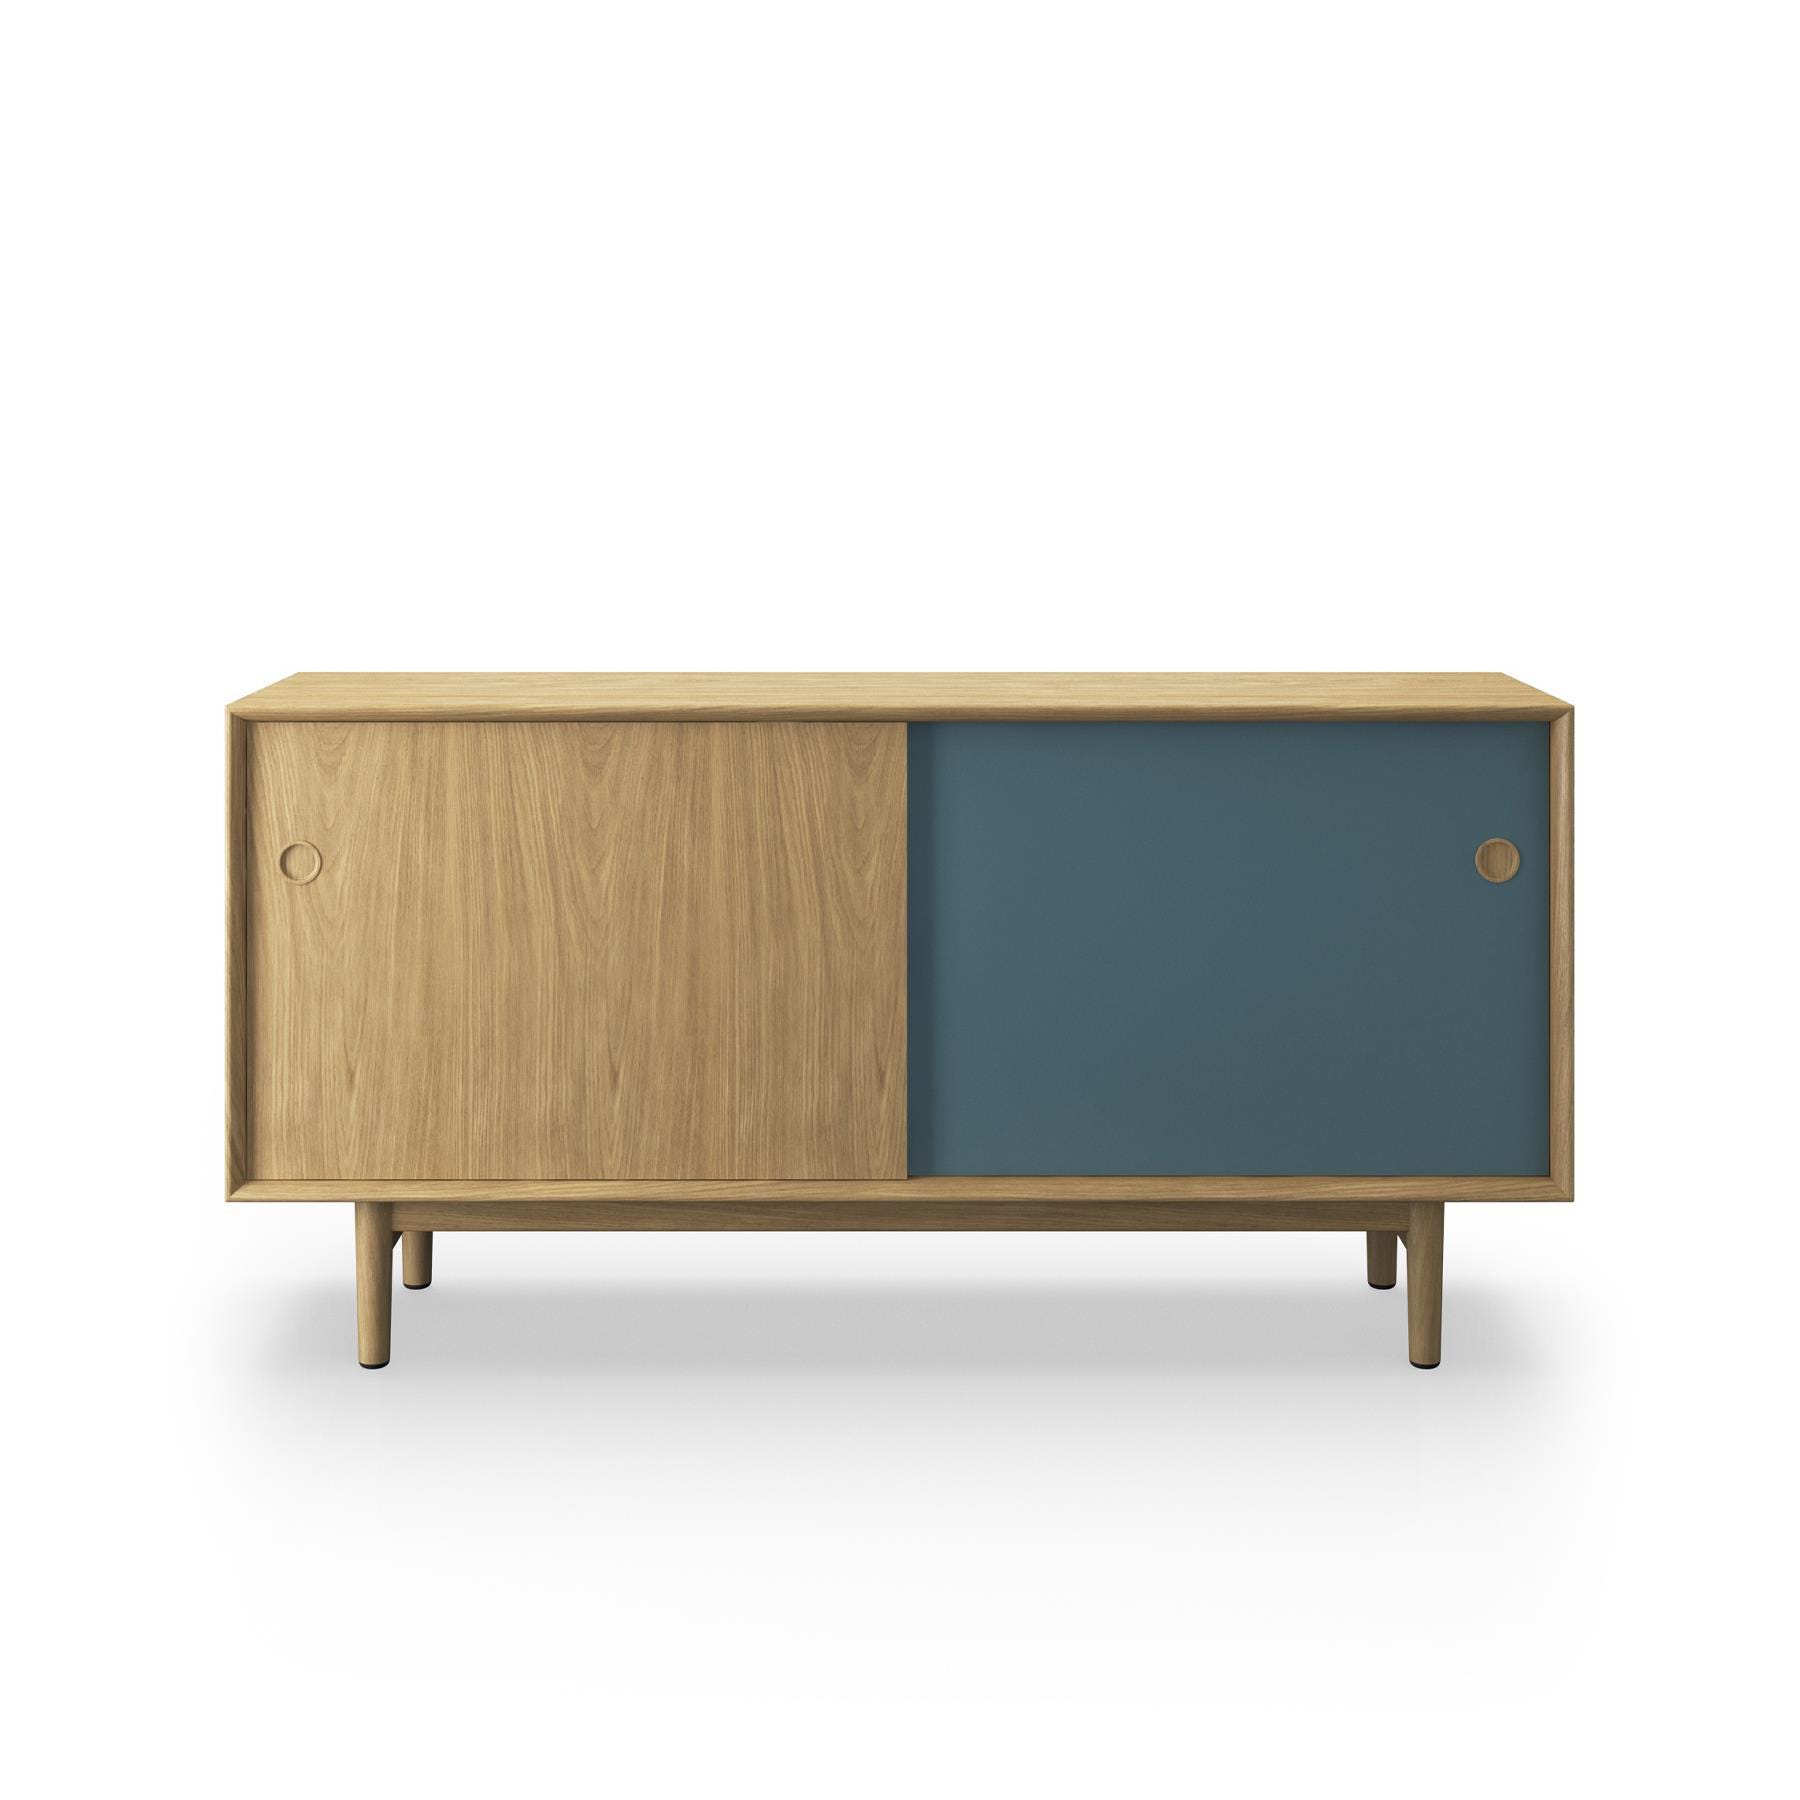 Sibast No 11 Sideboard White Oiled Oak Blue And Natural Front Wooden Legs Light Wood Designer Furniture From Holloways Of Ludlow